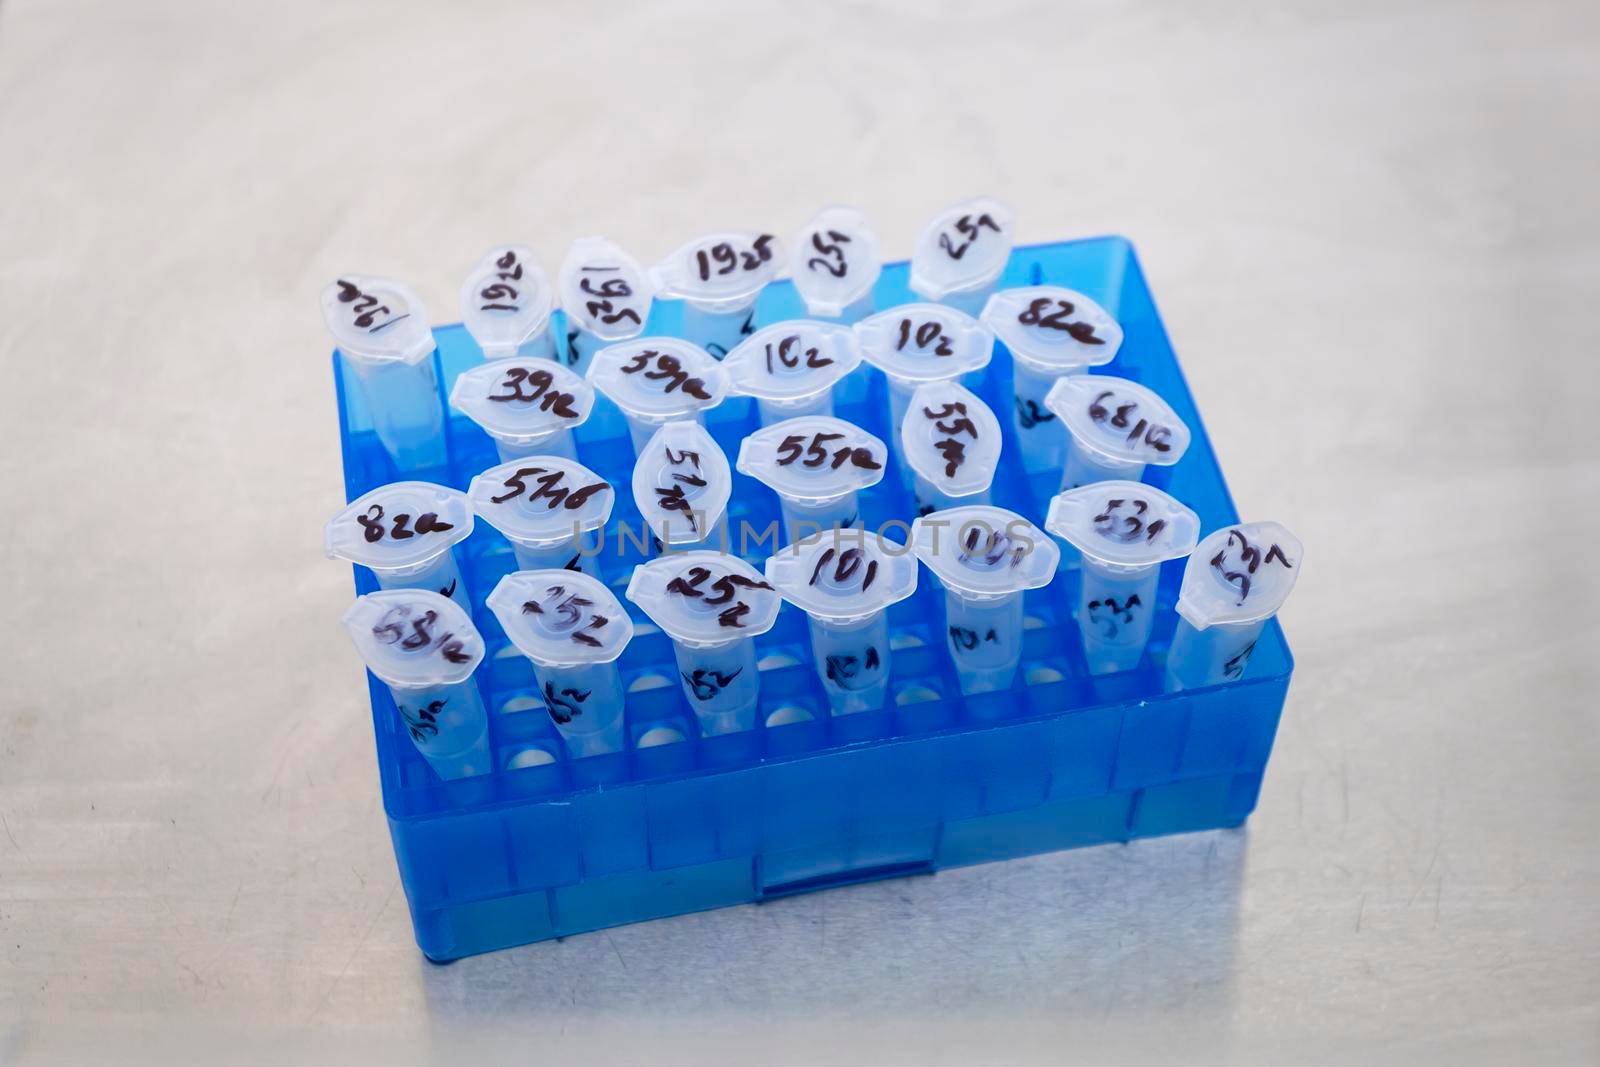 Numbered small test tubes in a blue rack.